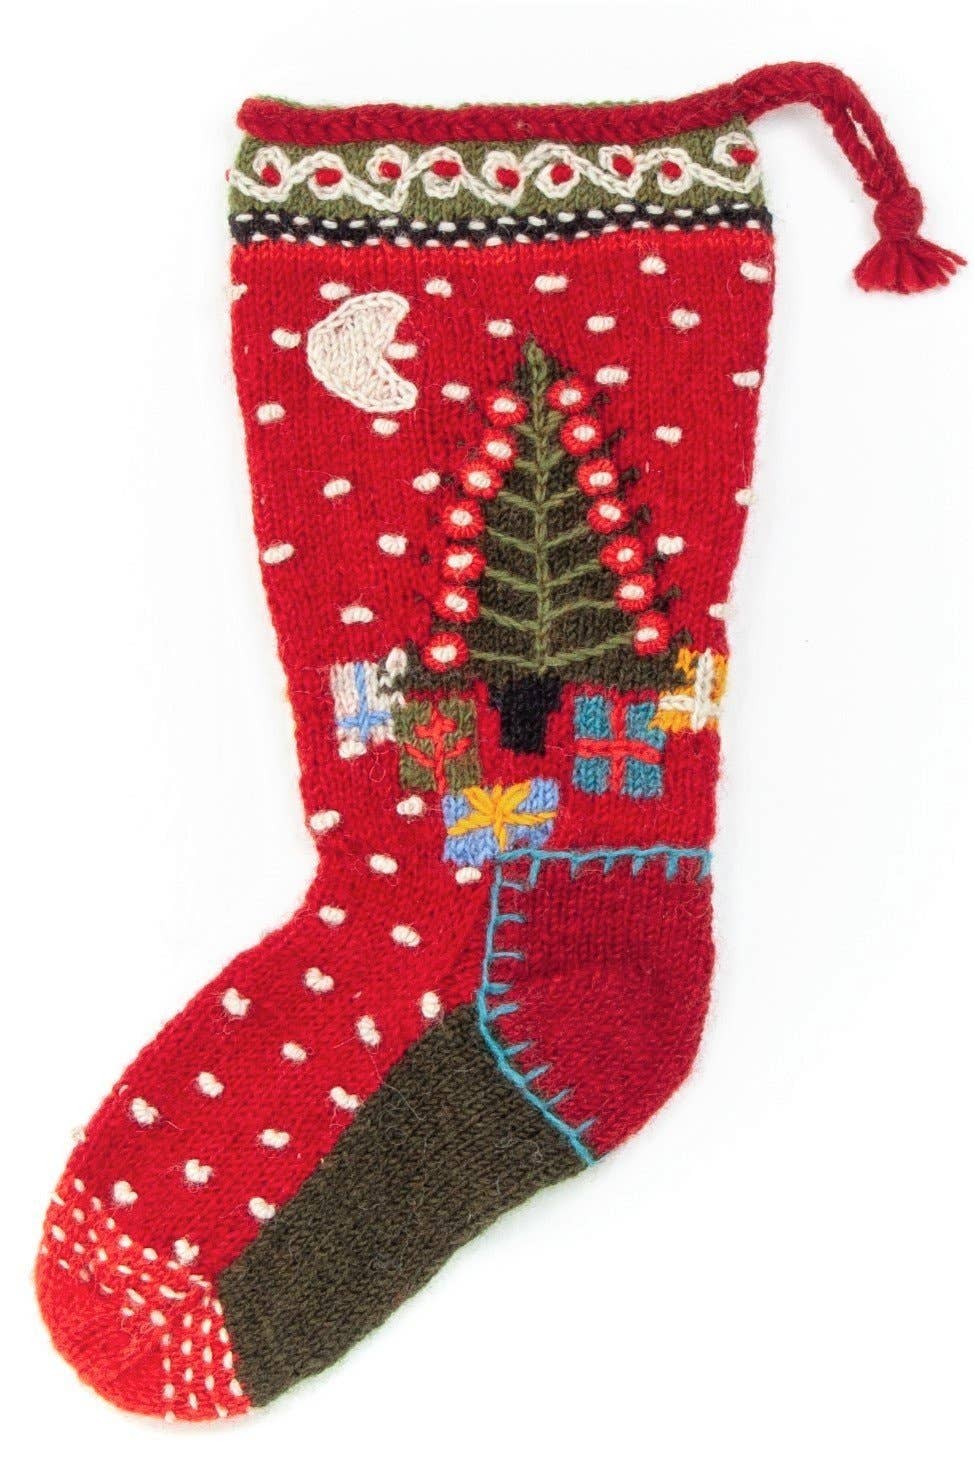 Knitted Wool Christmas Stocking - Presents